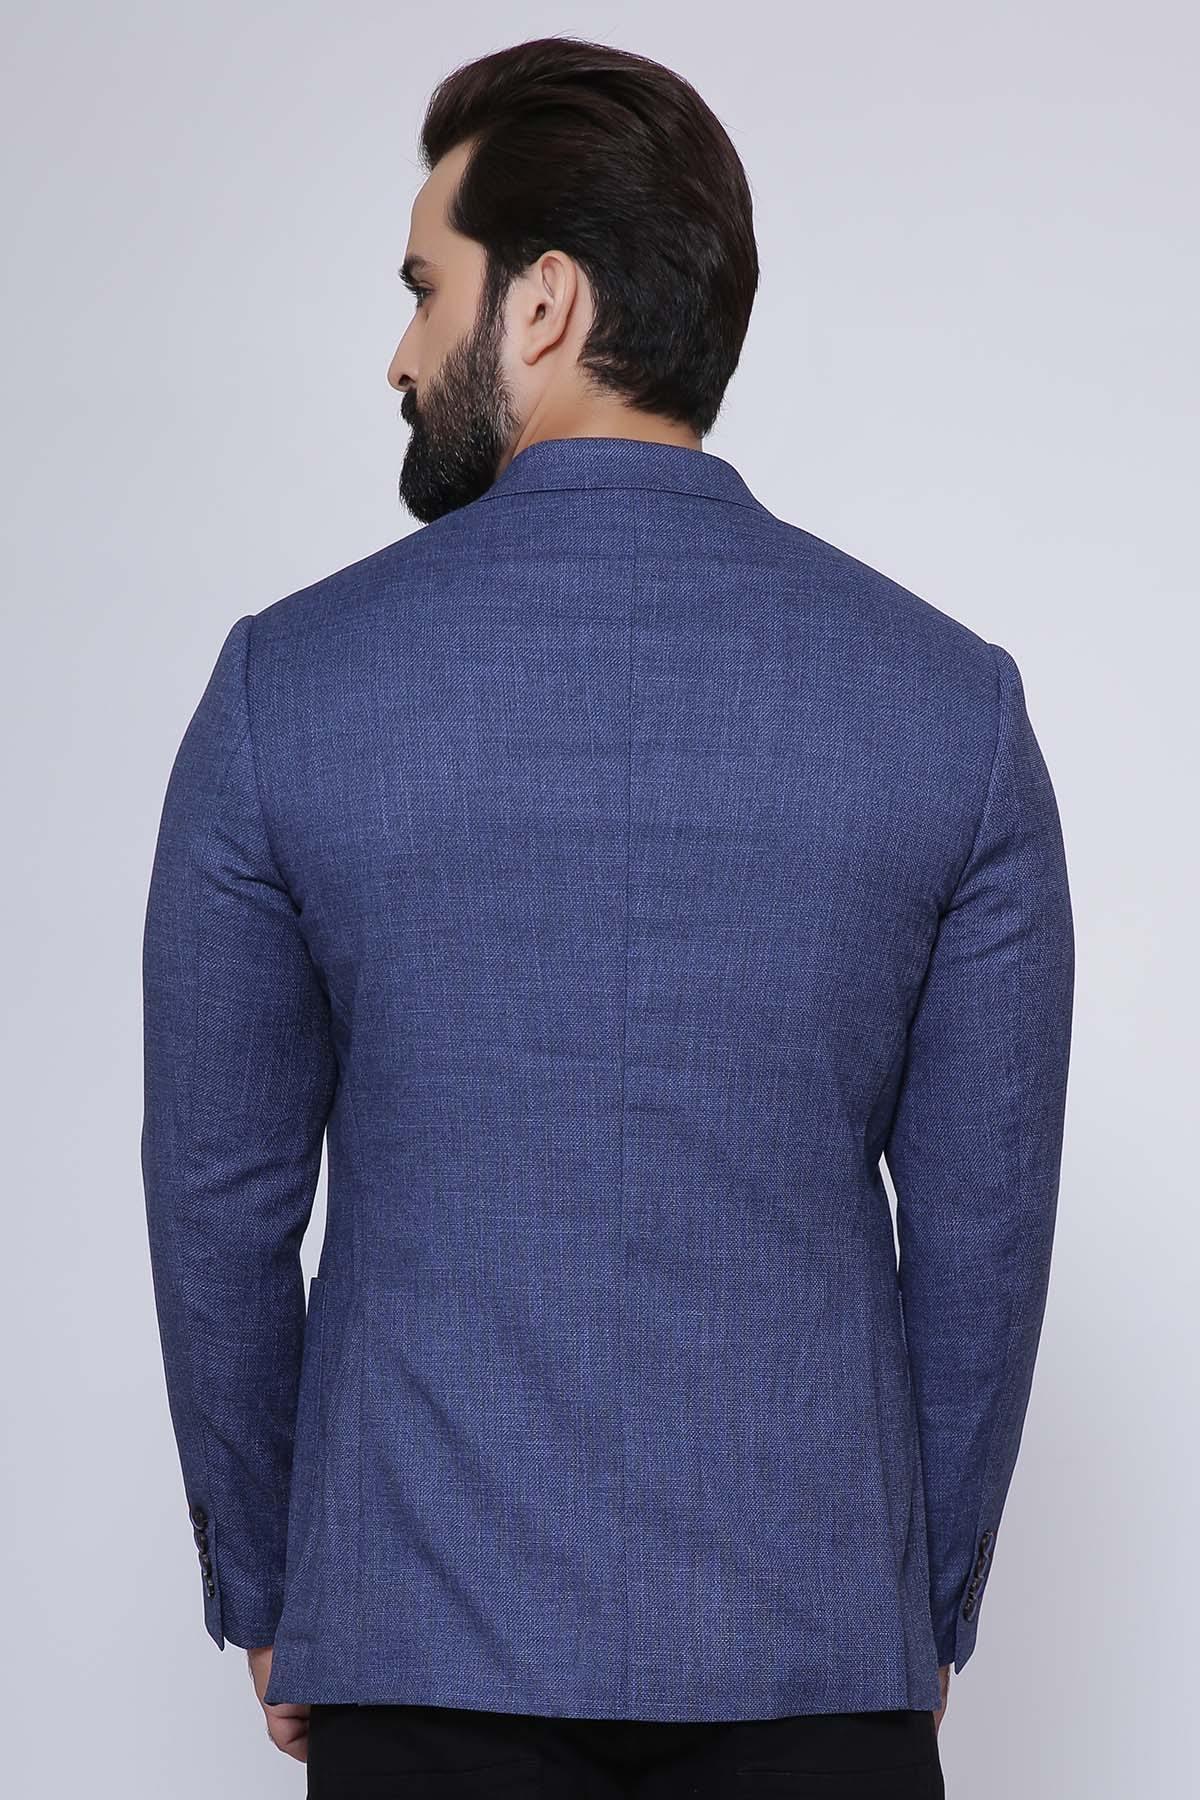 CASUAL COAT 2 BUTTON SLIM FIT BLUE at Charcoal Clothing